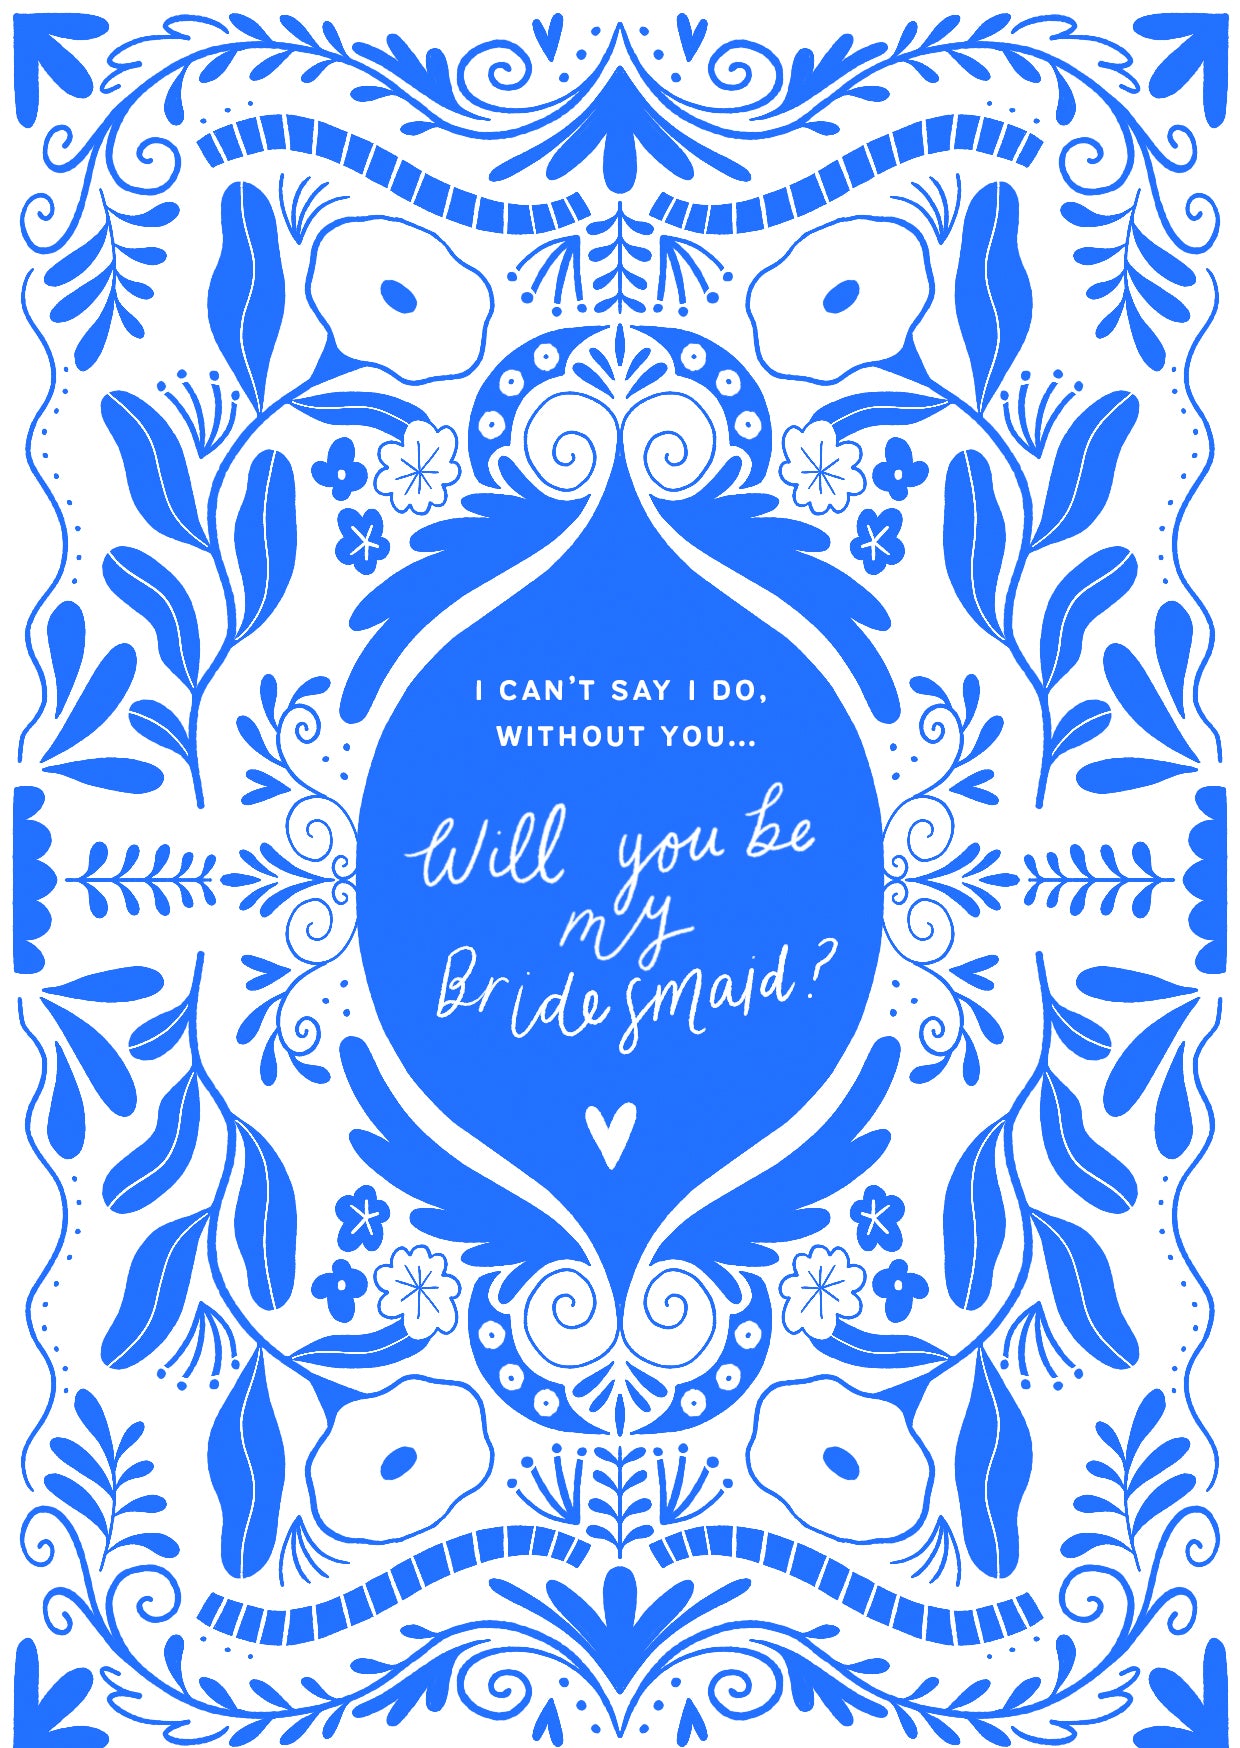 Will you be my Bridesmaid? - Symmetry